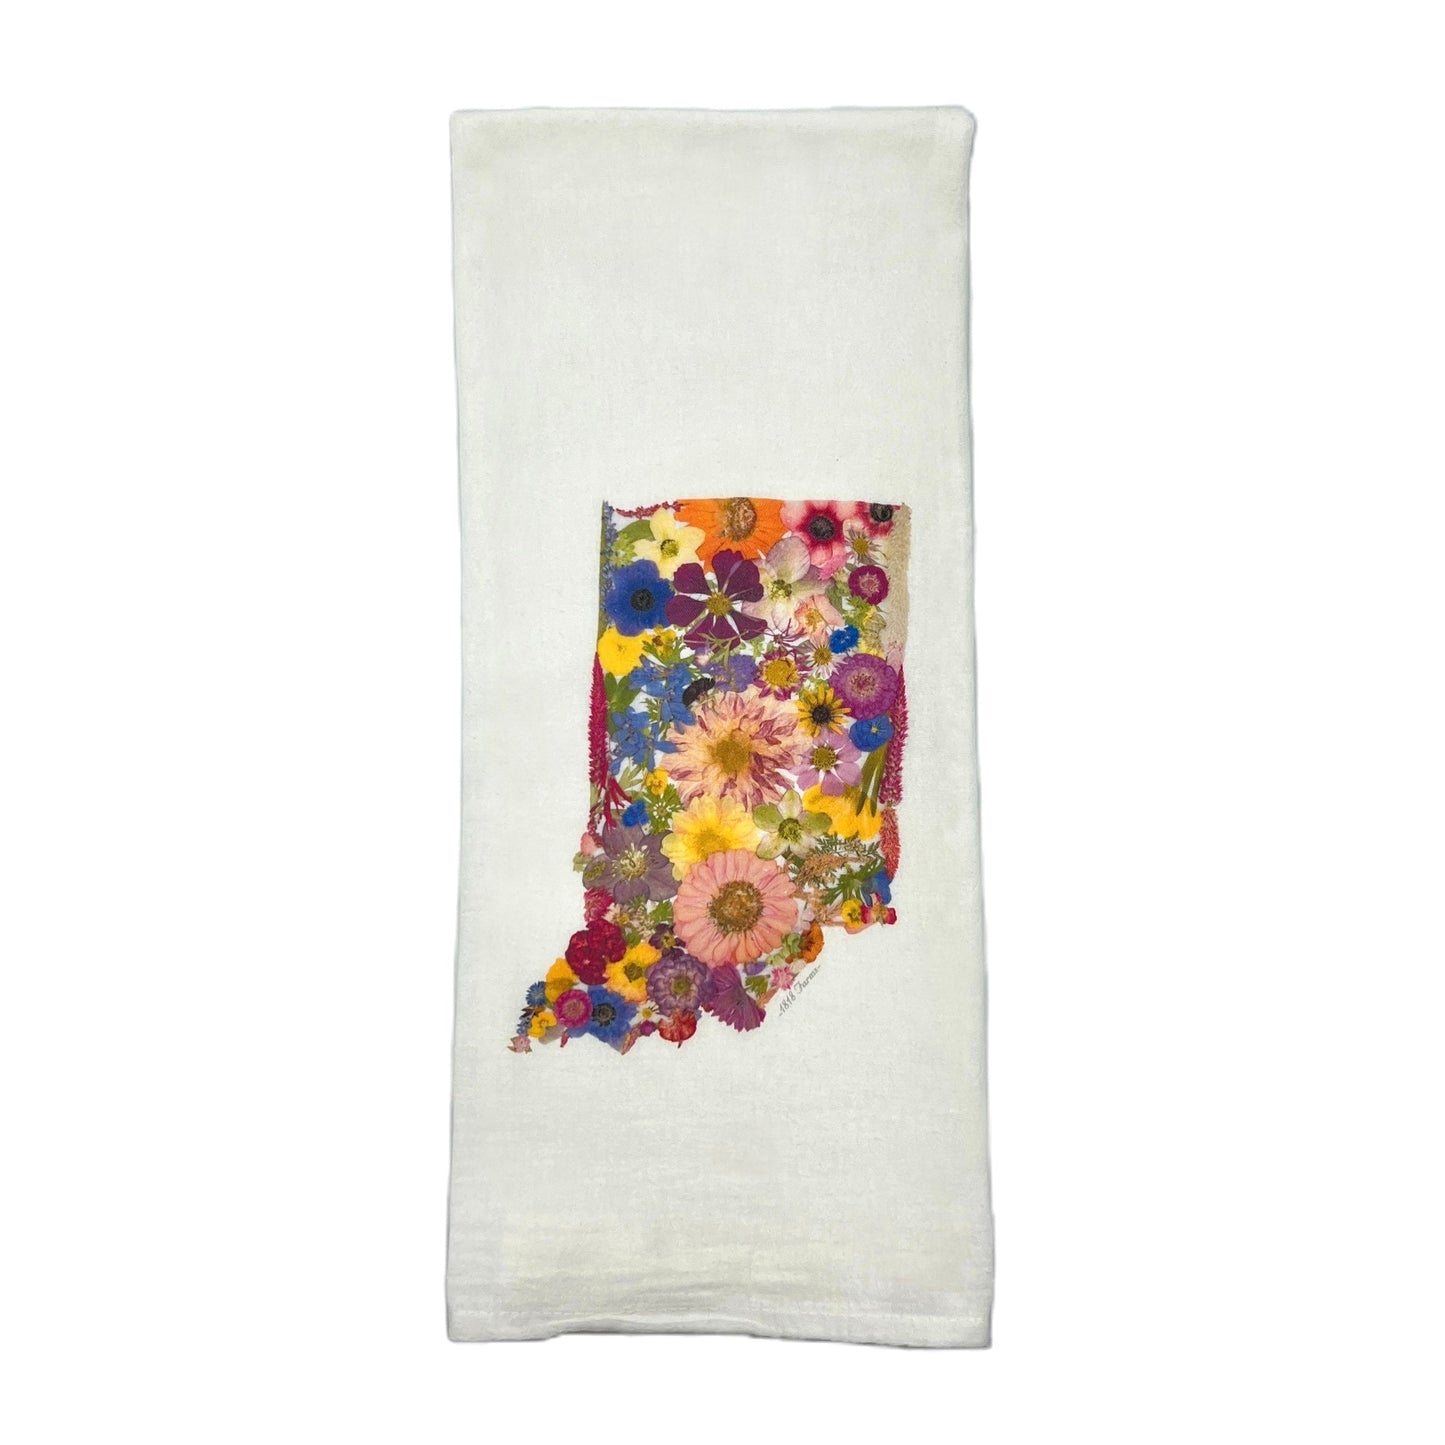 State Themed Flour Sack Towel  - "Where I Bloom" Collection Towel 1818 Farms Indiana  